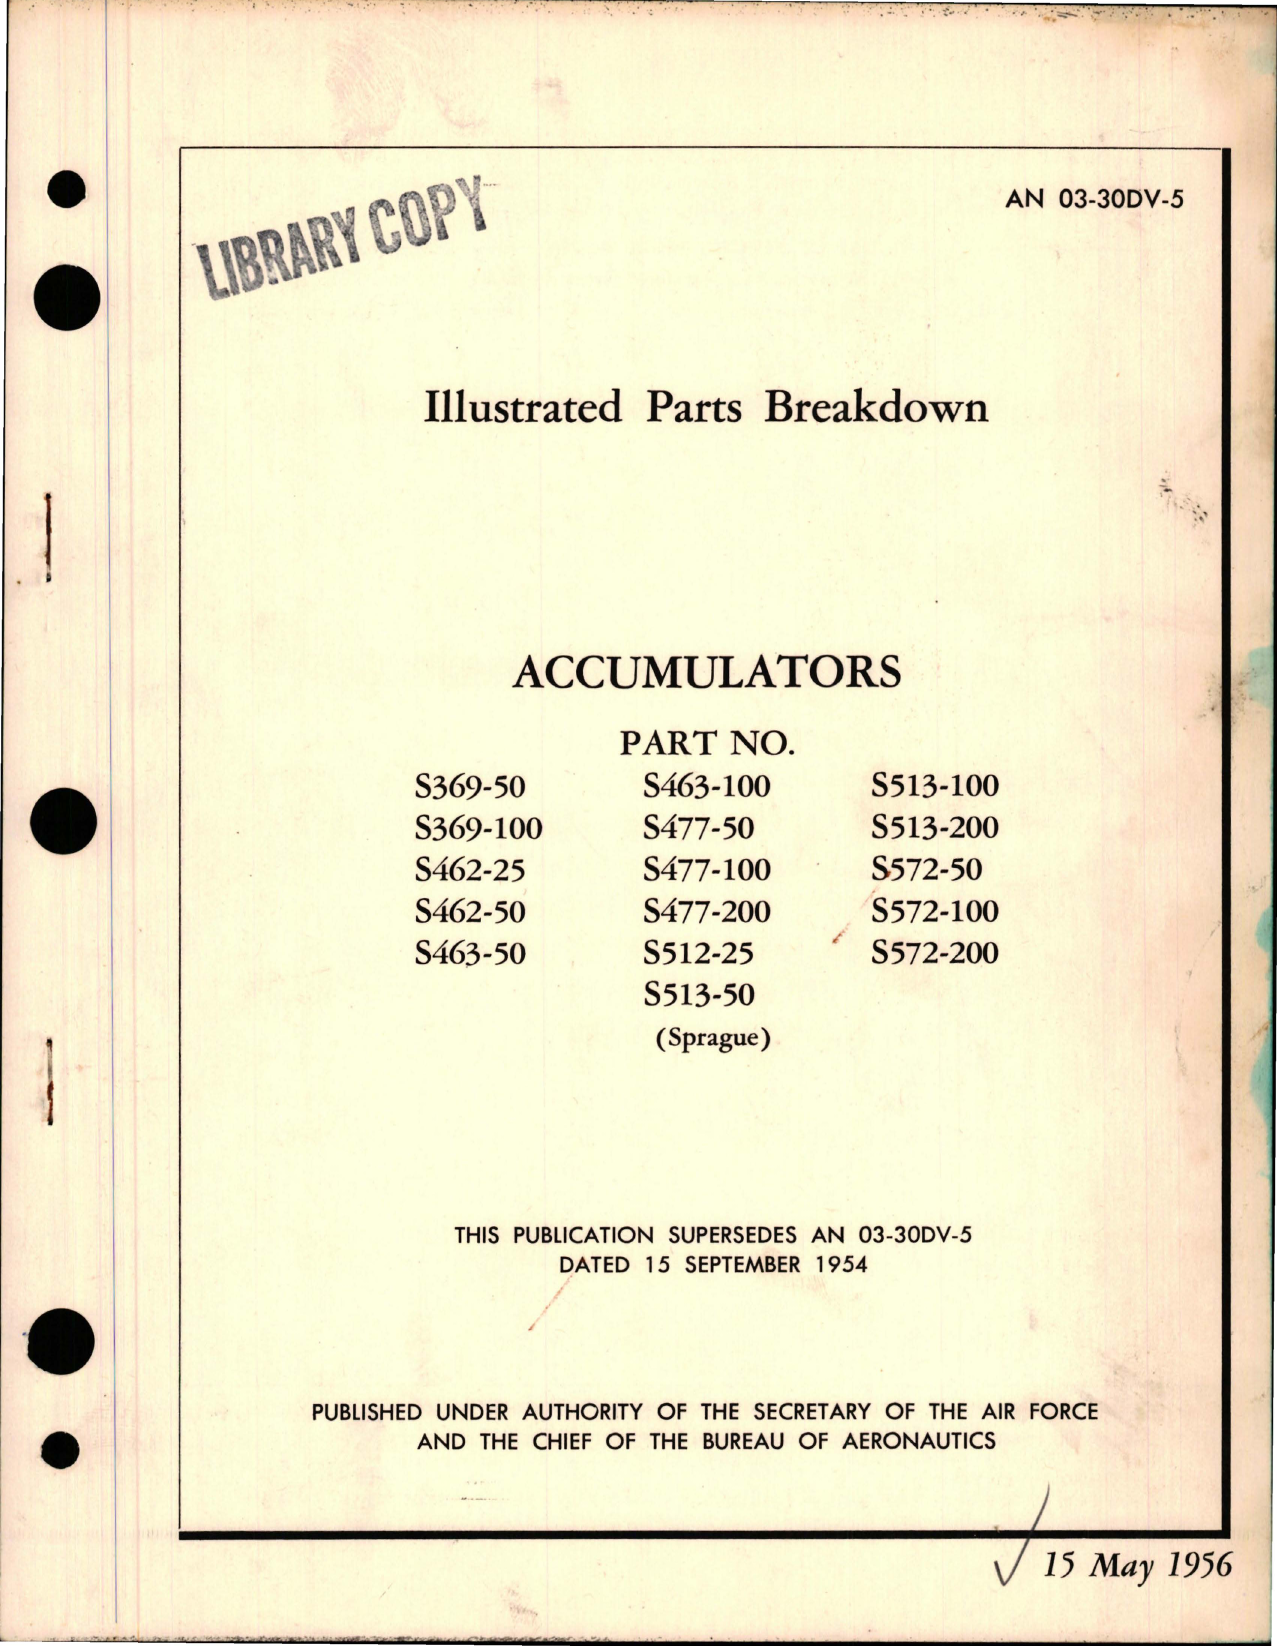 Sample page 1 from AirCorps Library document: Illustrated Parts Breakdown for Accumulators